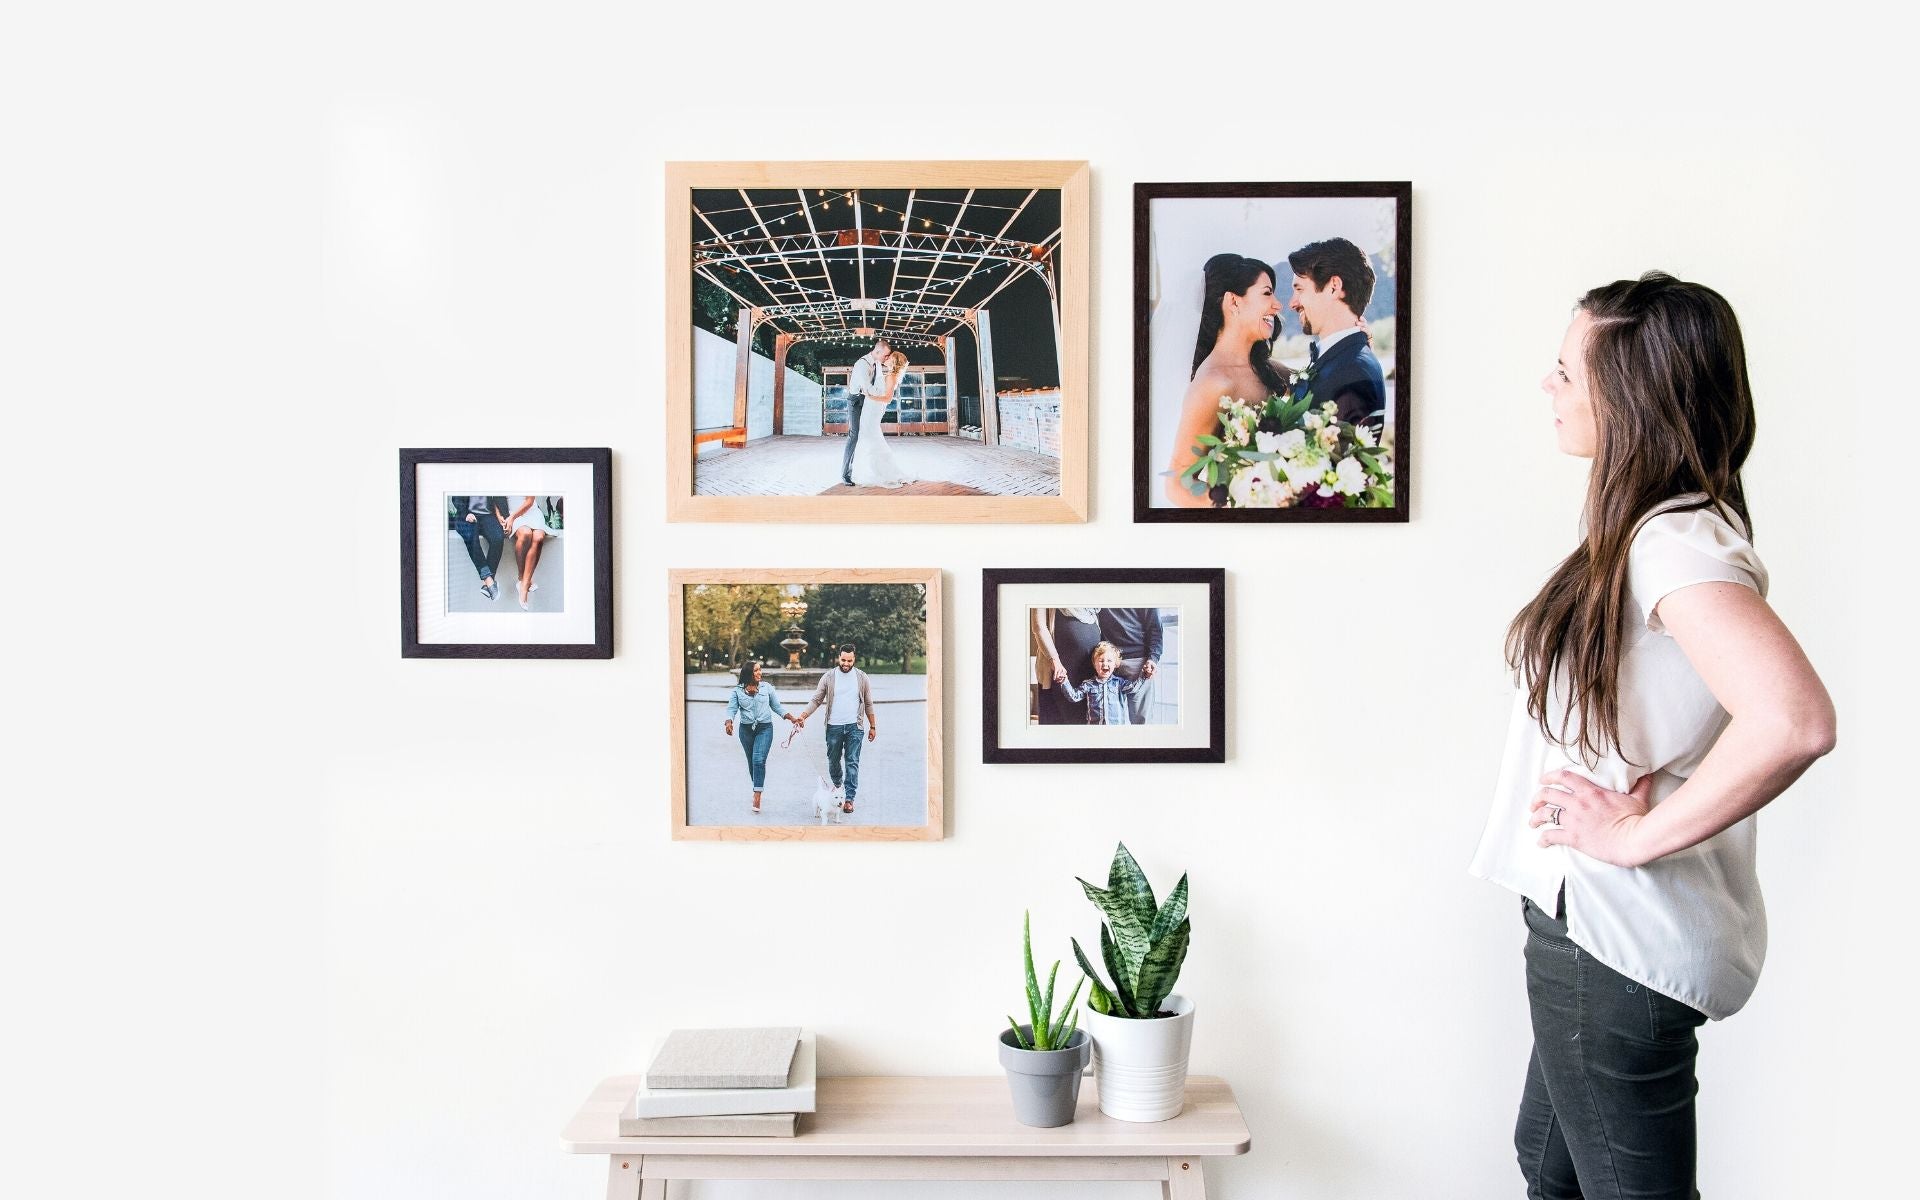 How To Hang Pictures On Your Wall At Home: Pro Tips